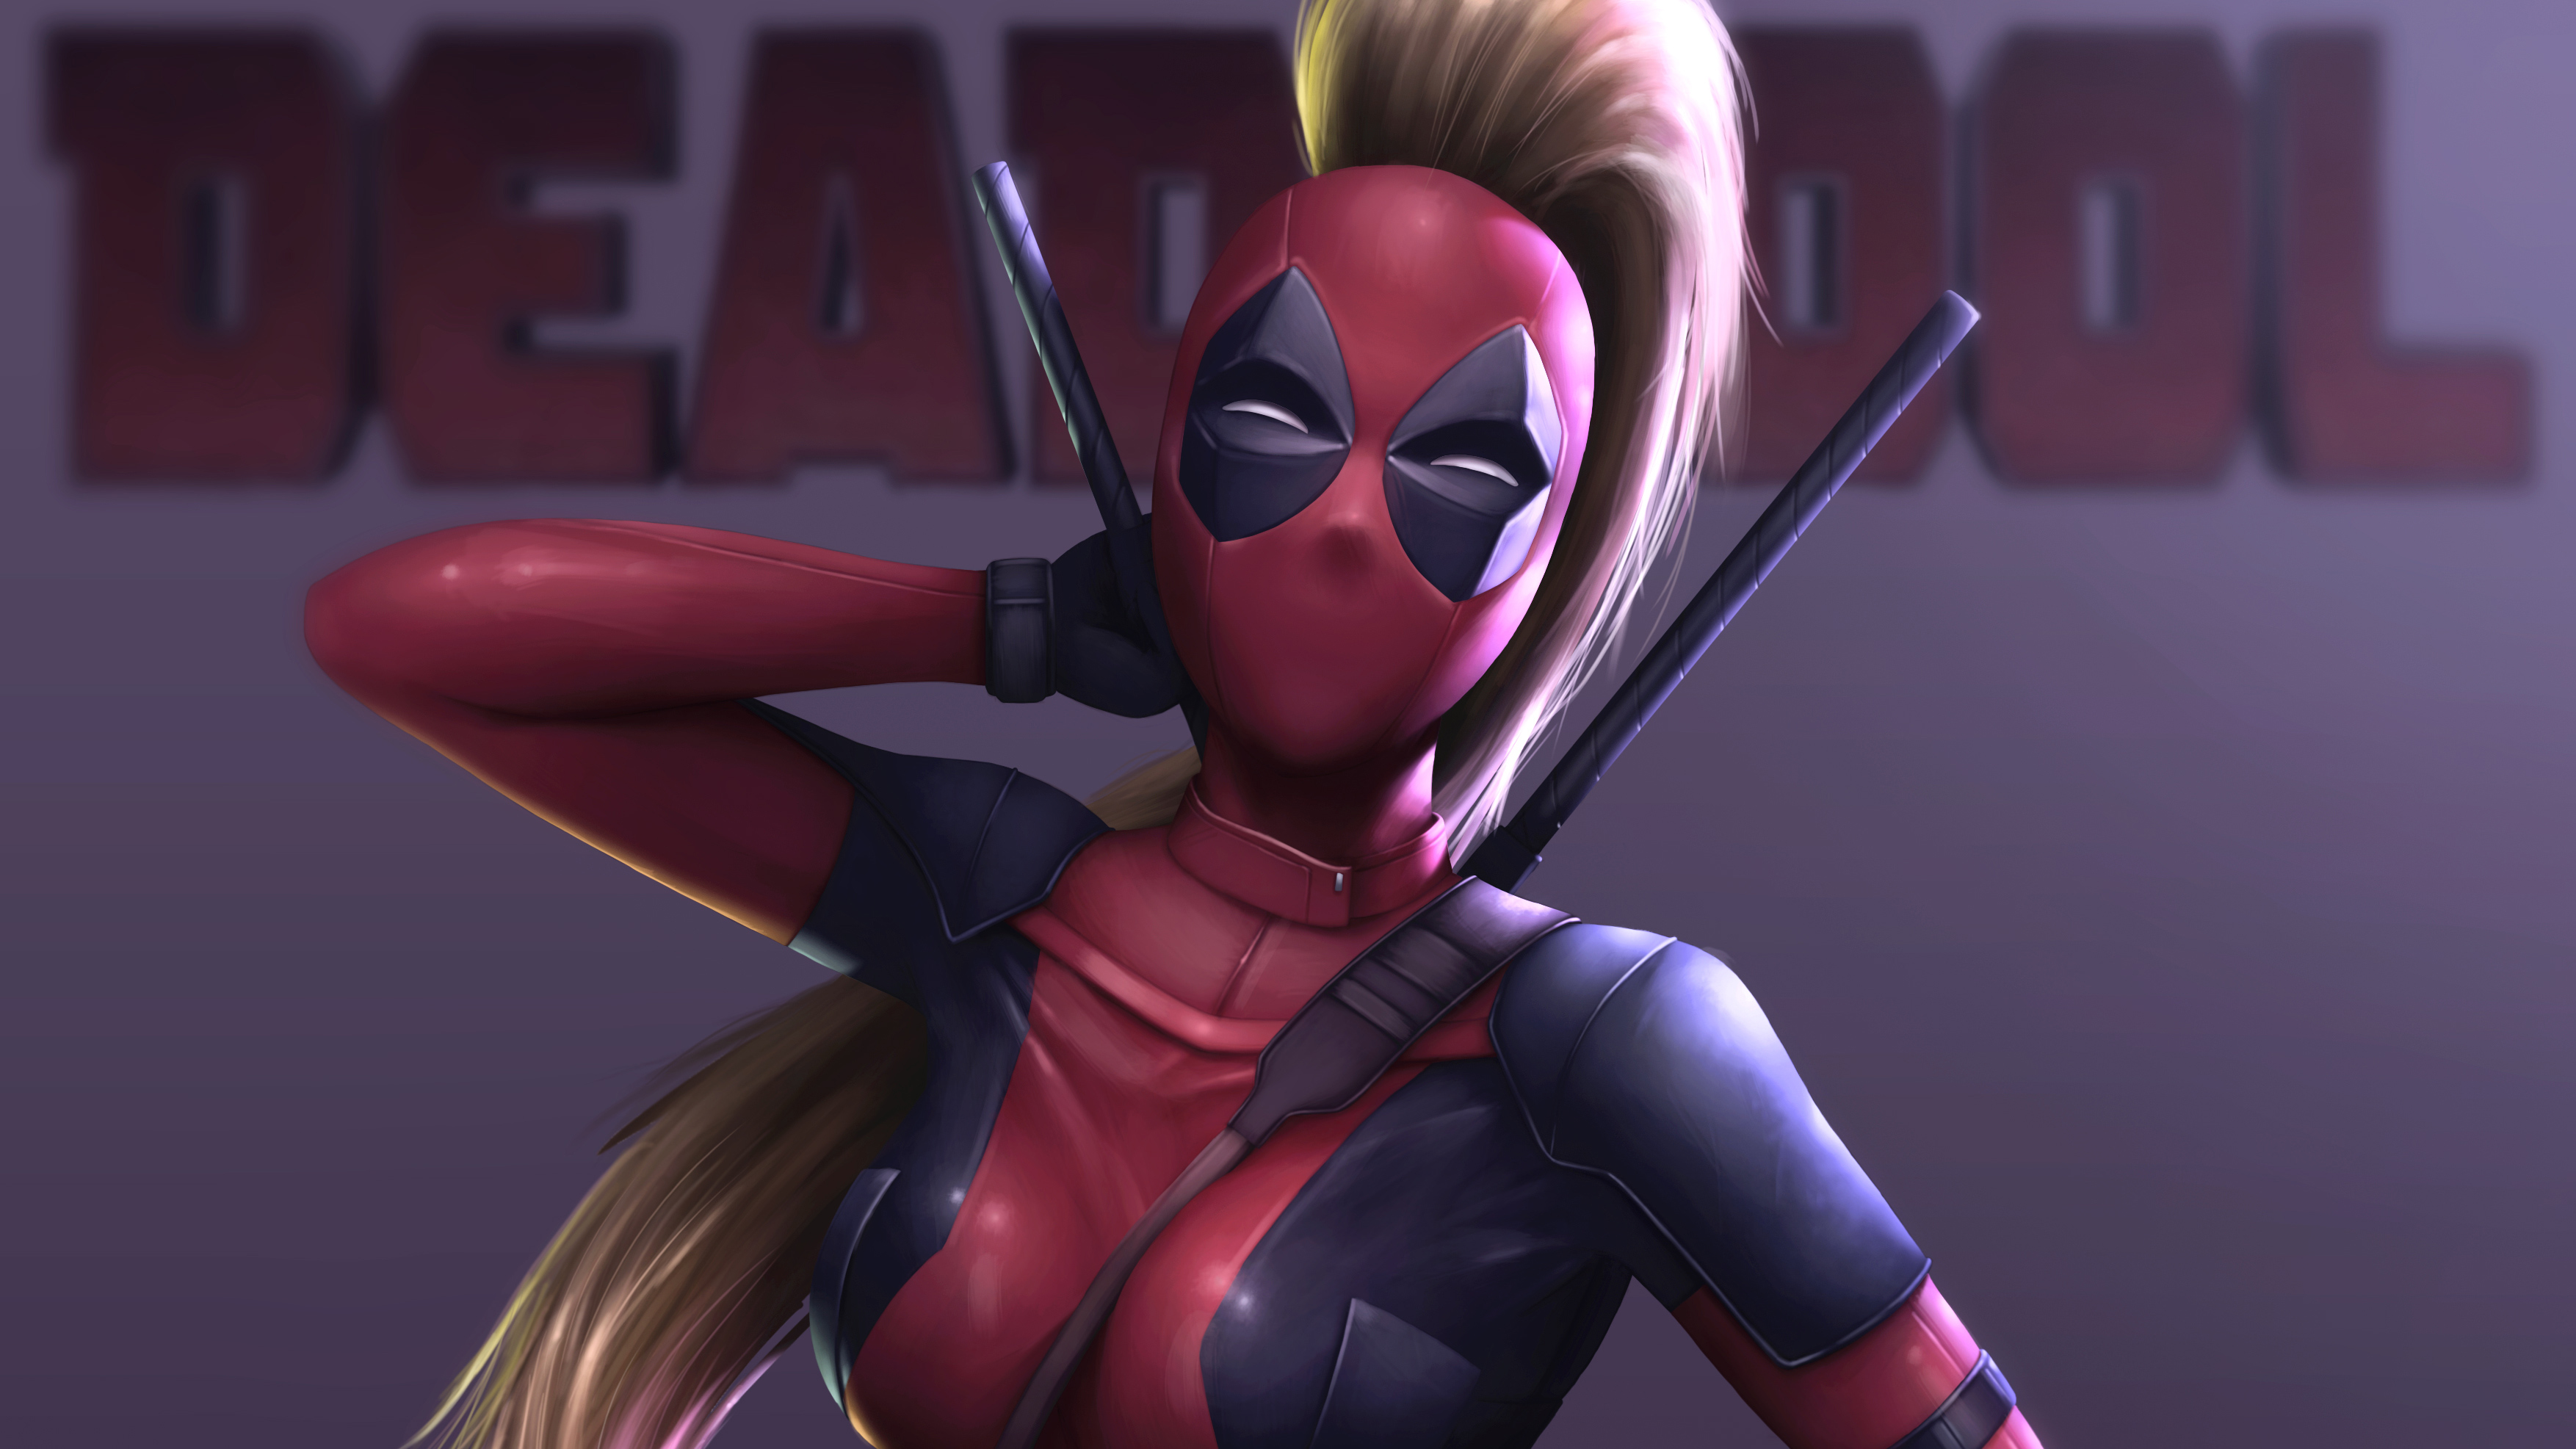 Lady Deadpool 4k Hd Superheroes 4k Wallpapers Images Backgrounds Photos And Pictures